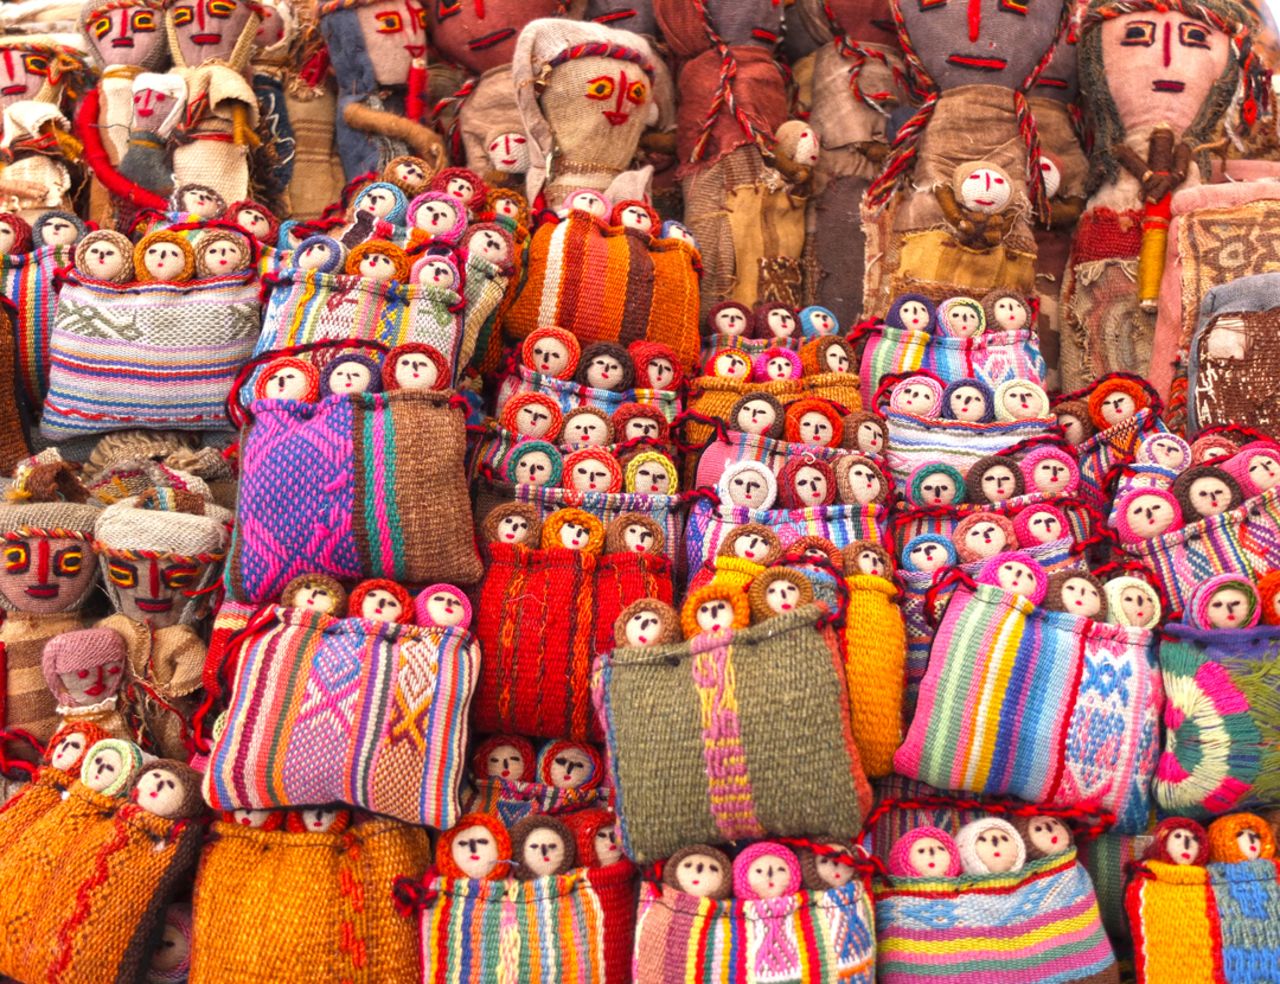 A great escape from the city of Cusco, Pisac is known for its local craft markets.